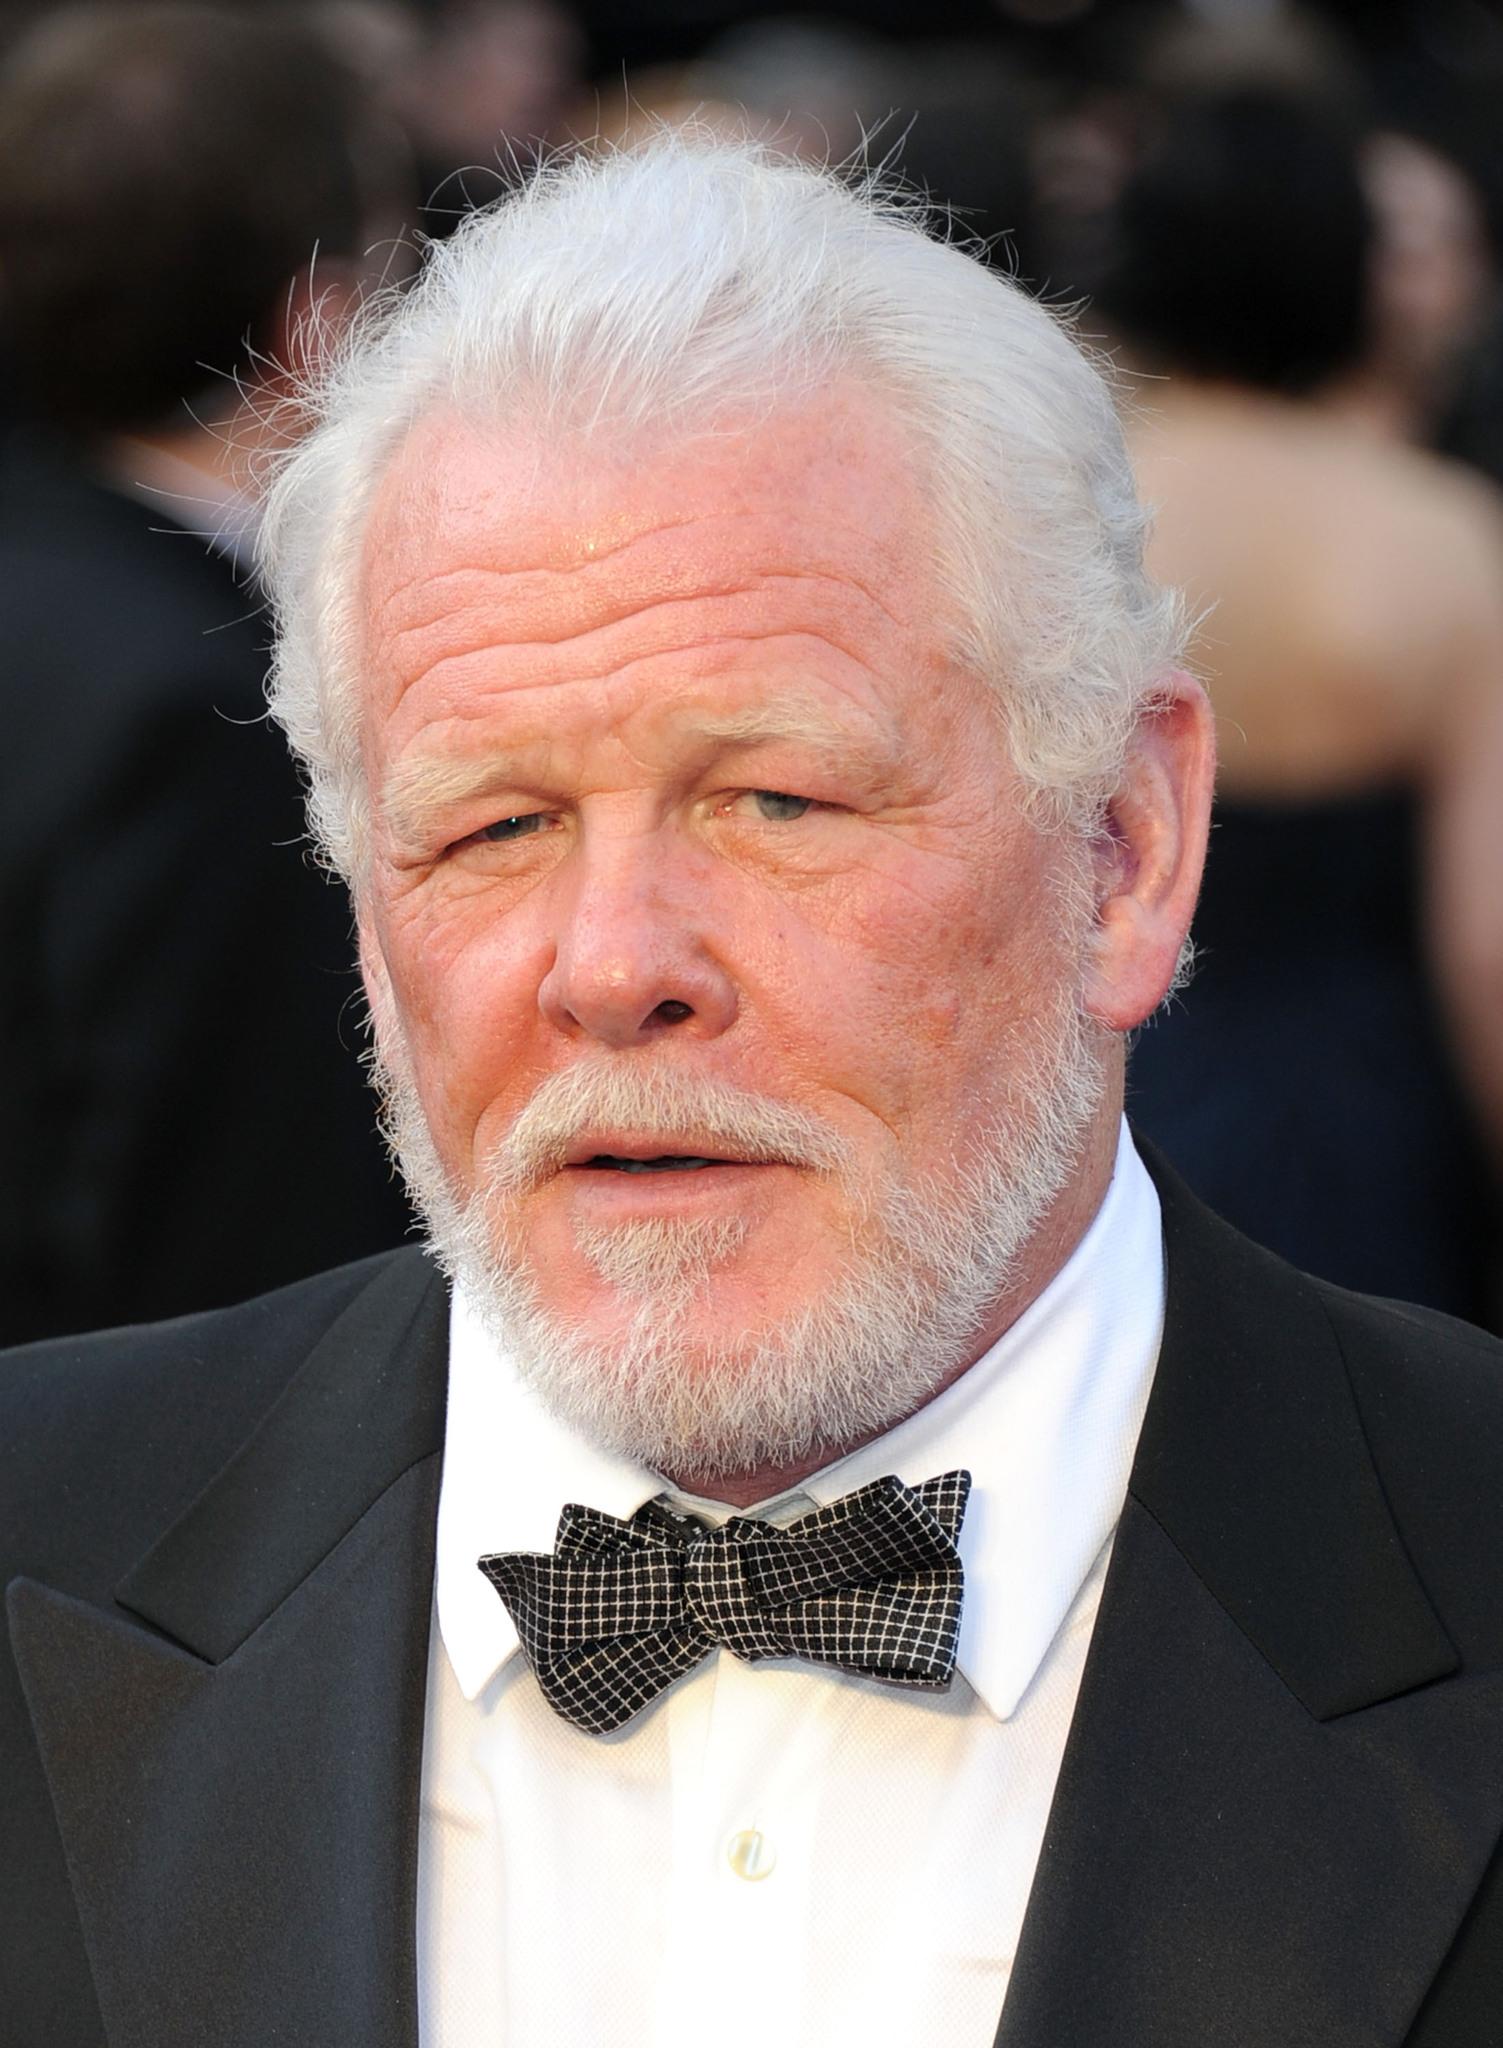 Pictures of Nick Nolte.